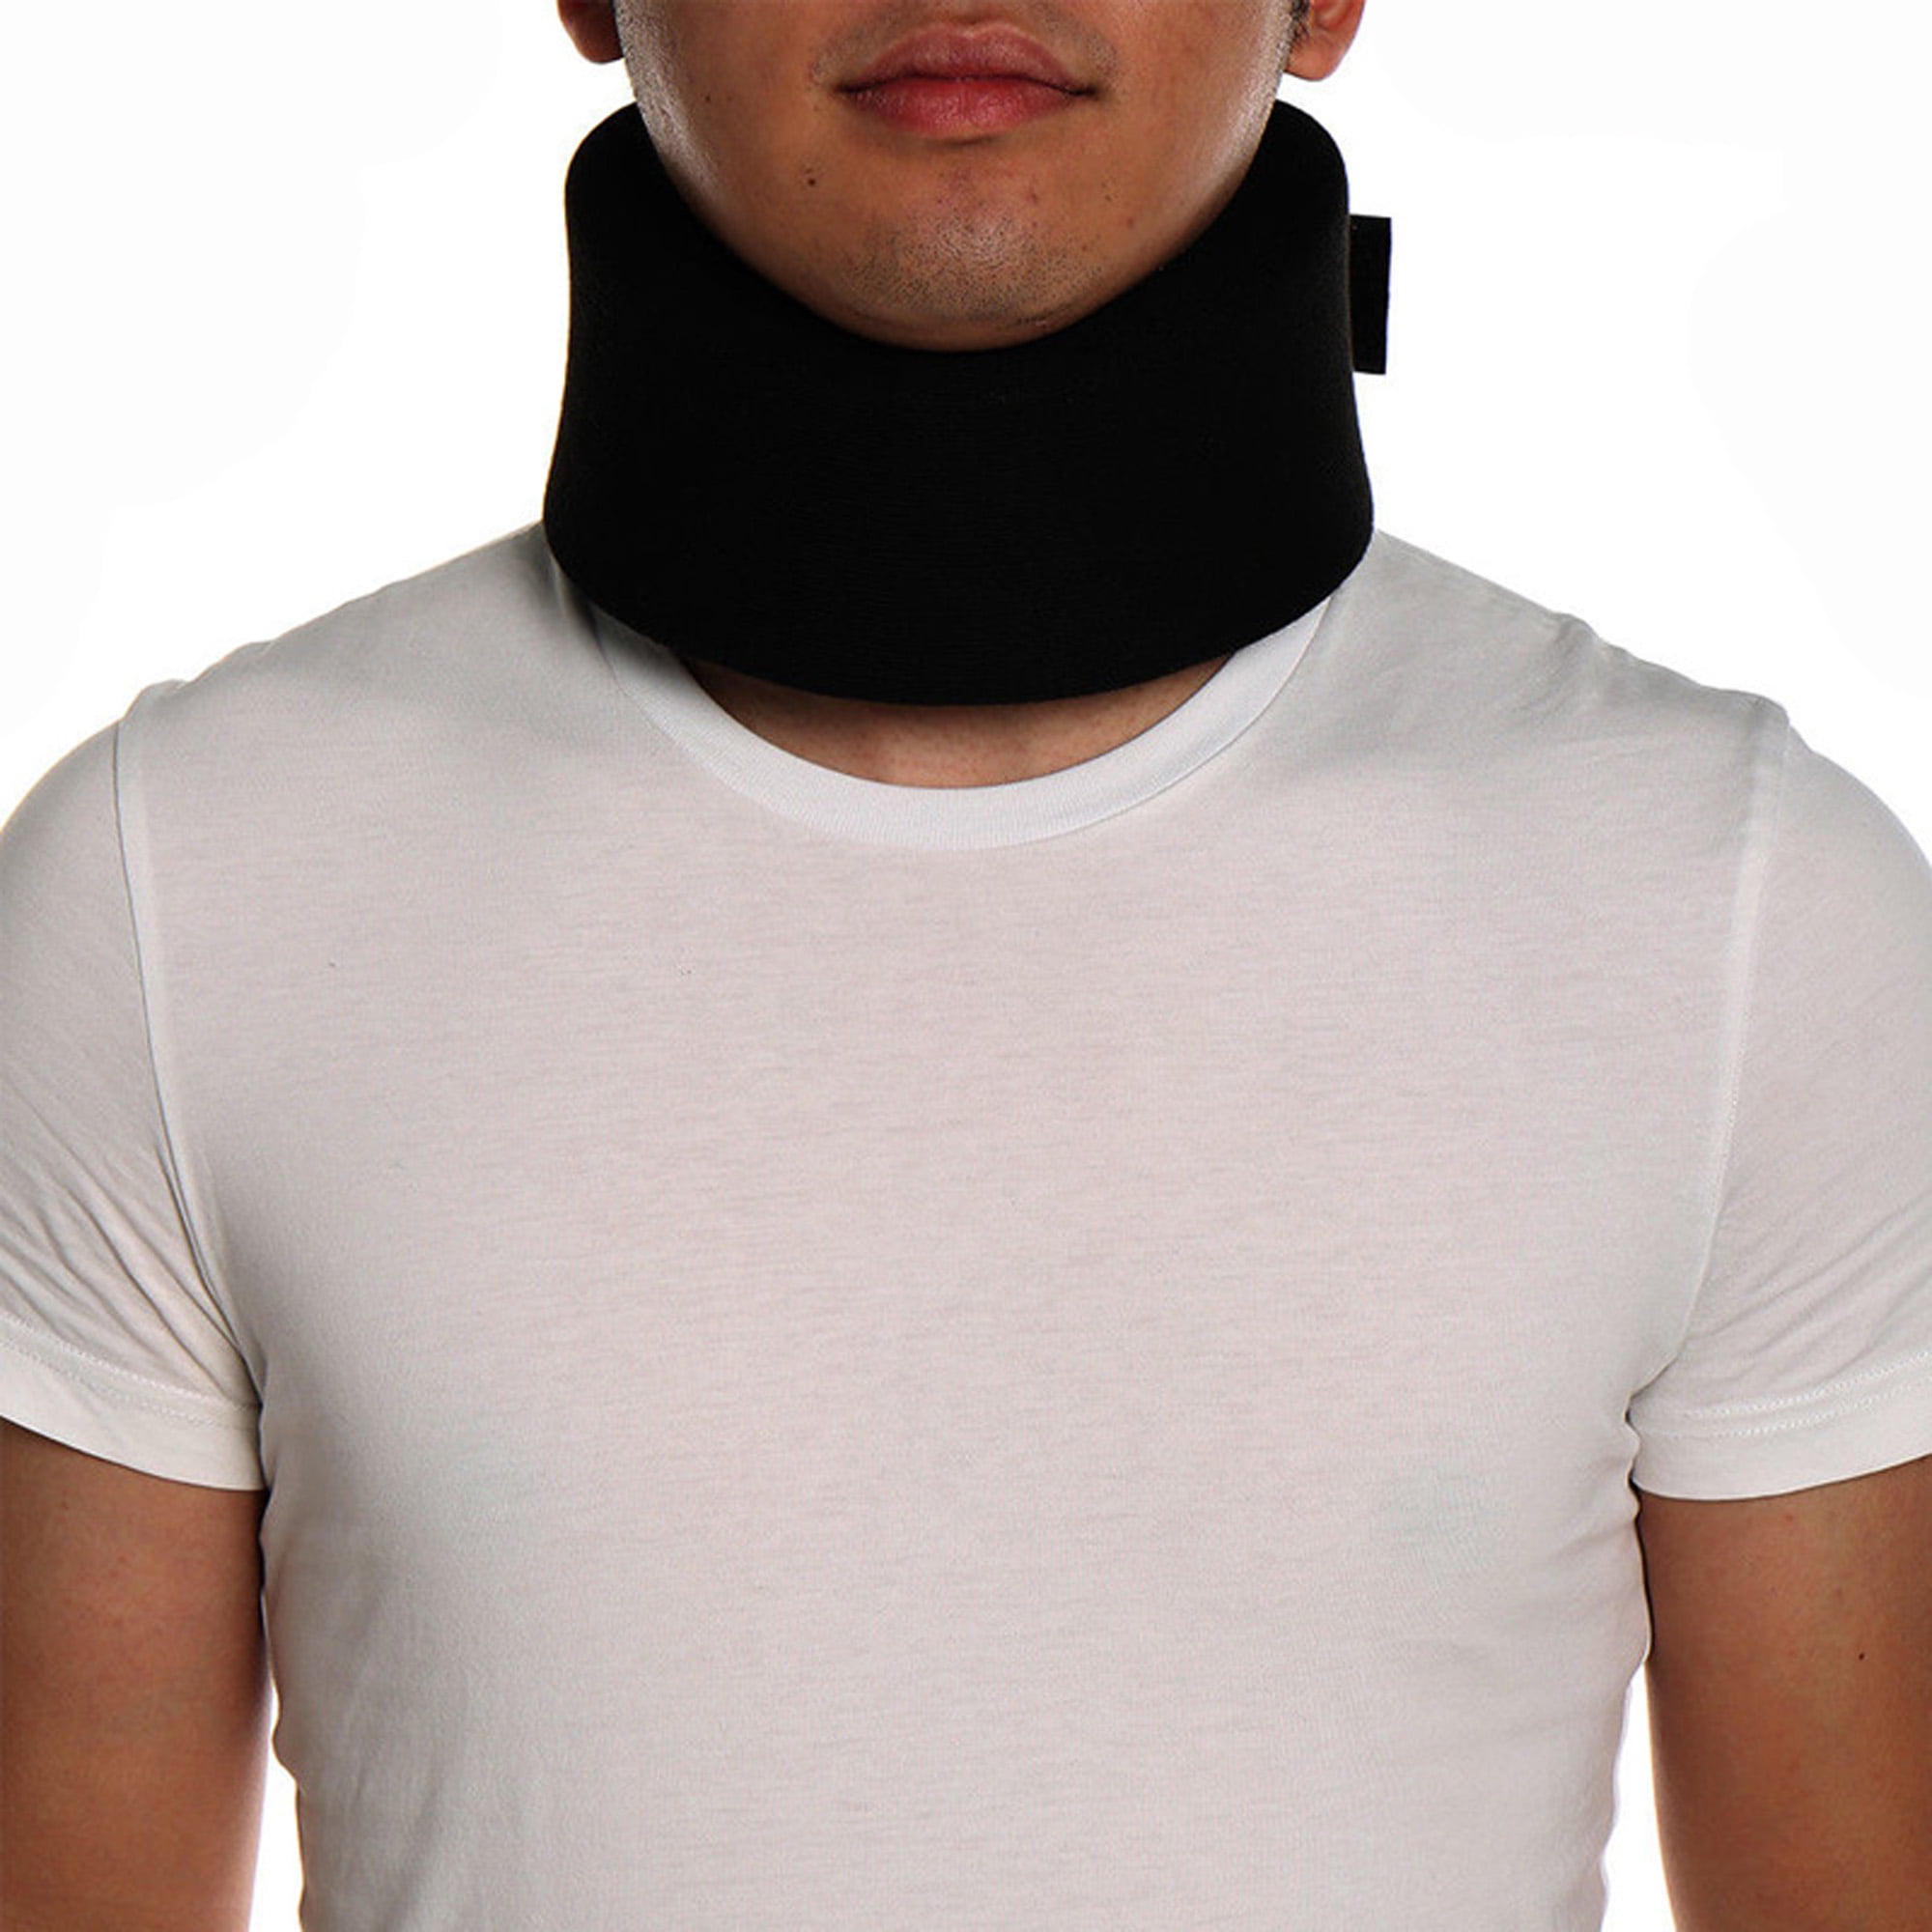 support for neck and shoulder pain